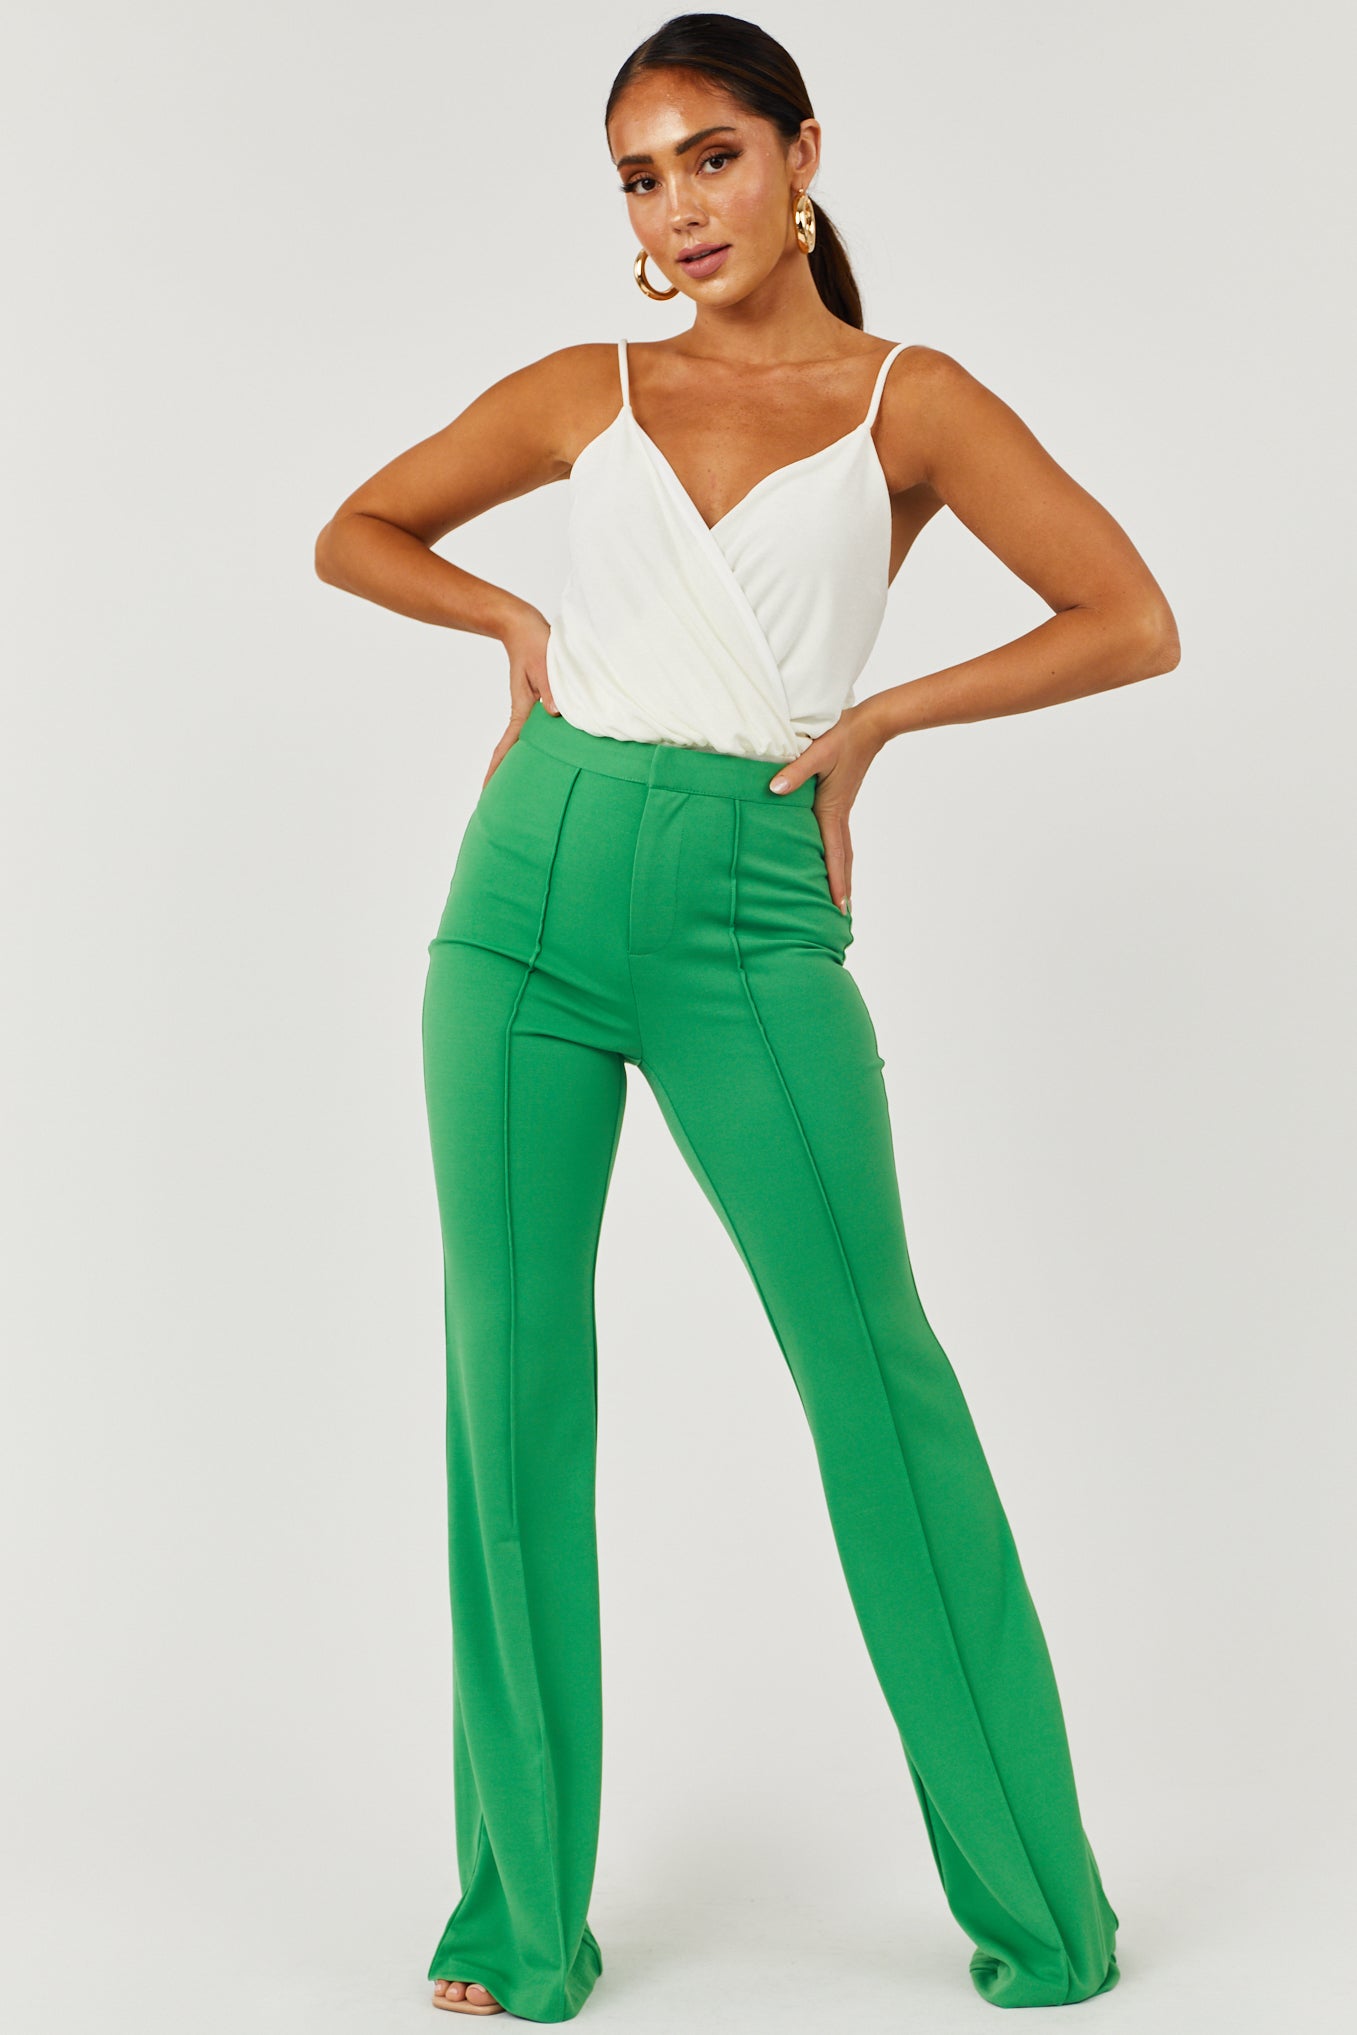 Flying Tomato Green High Rise Flare Pants with Seam Detail | Lime Lush